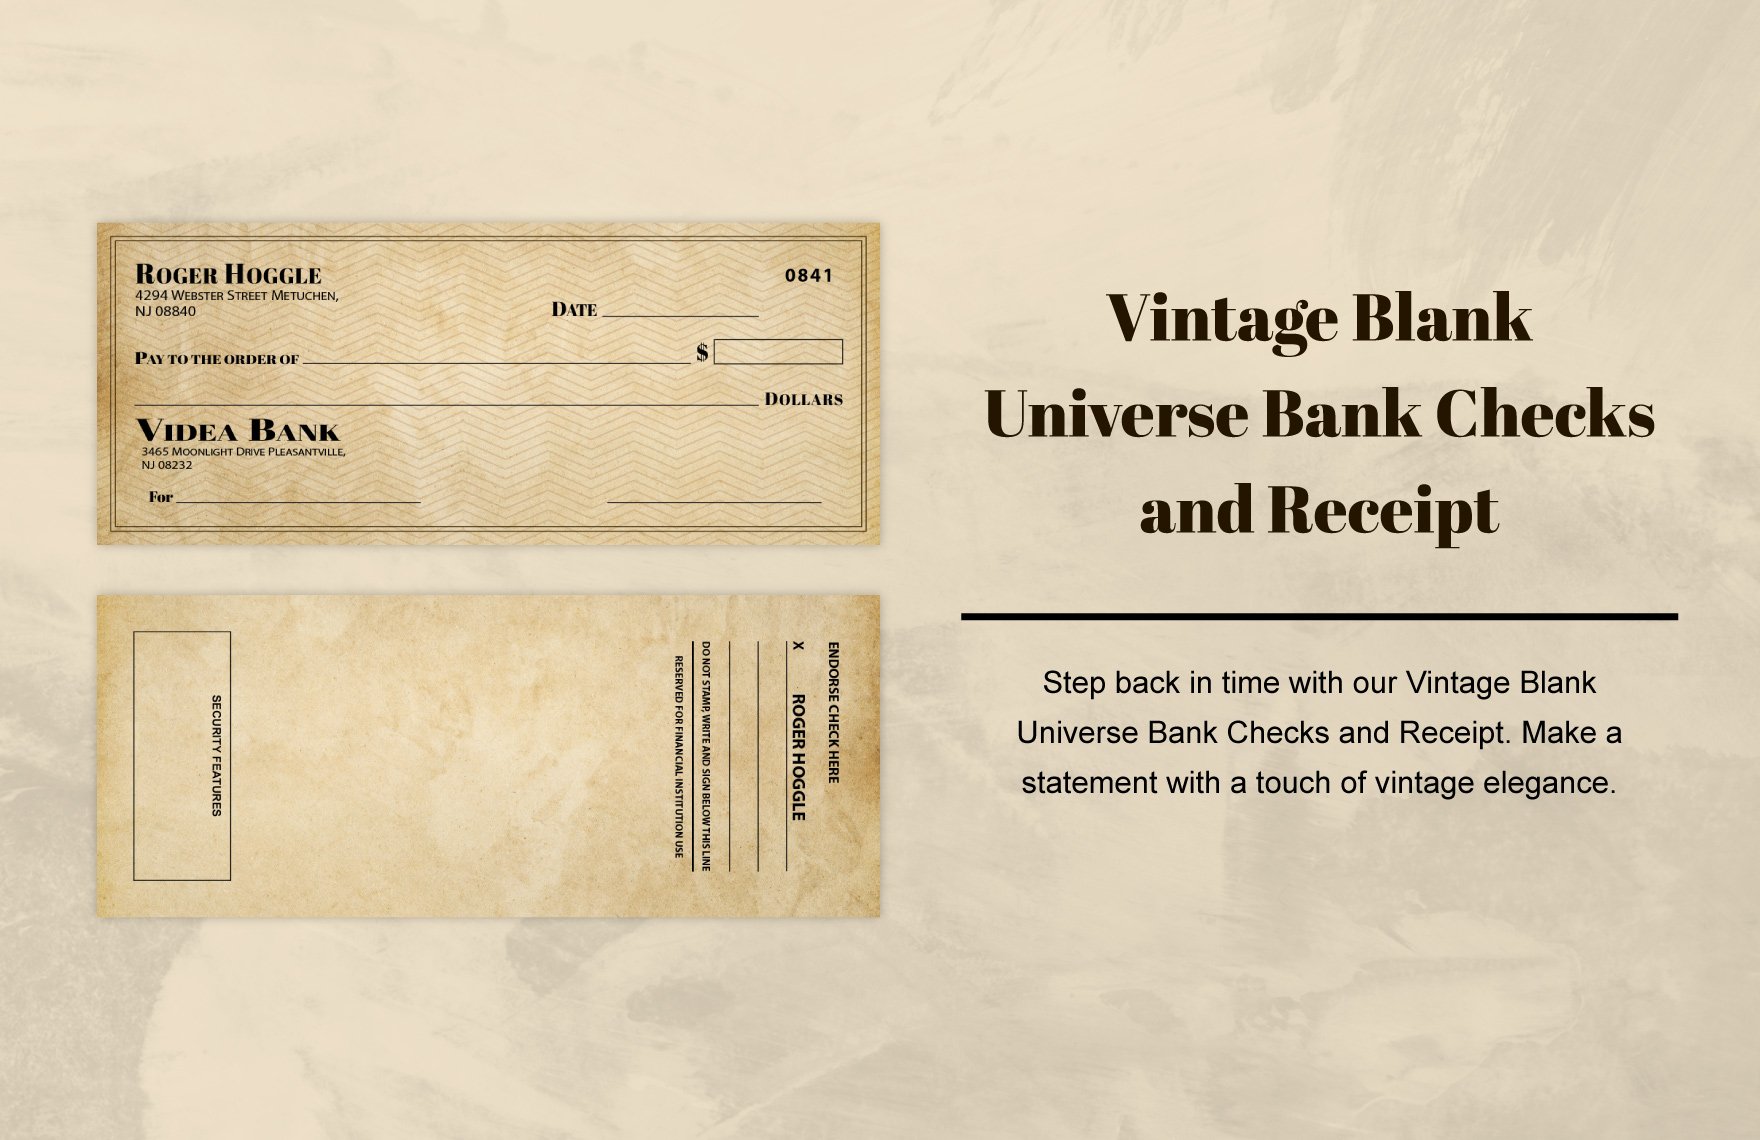 Vintage Blank Universe Bank Checks and Receipt in Word, Illustrator, PSD